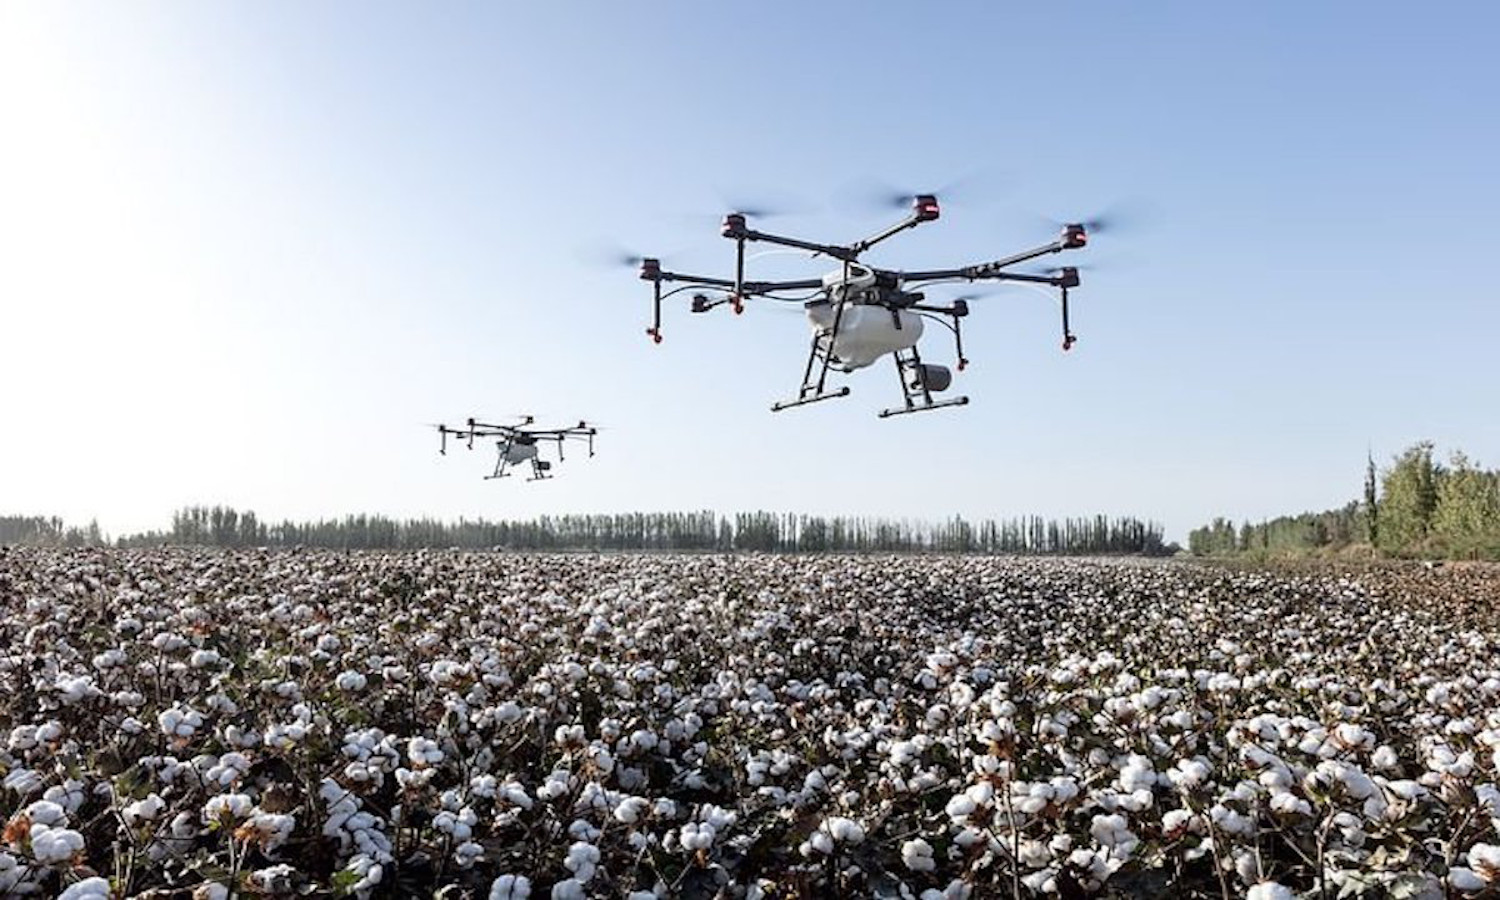 AgFunder’s report finds dramatic investment growth in the AgriFoodTech sector in 2020.